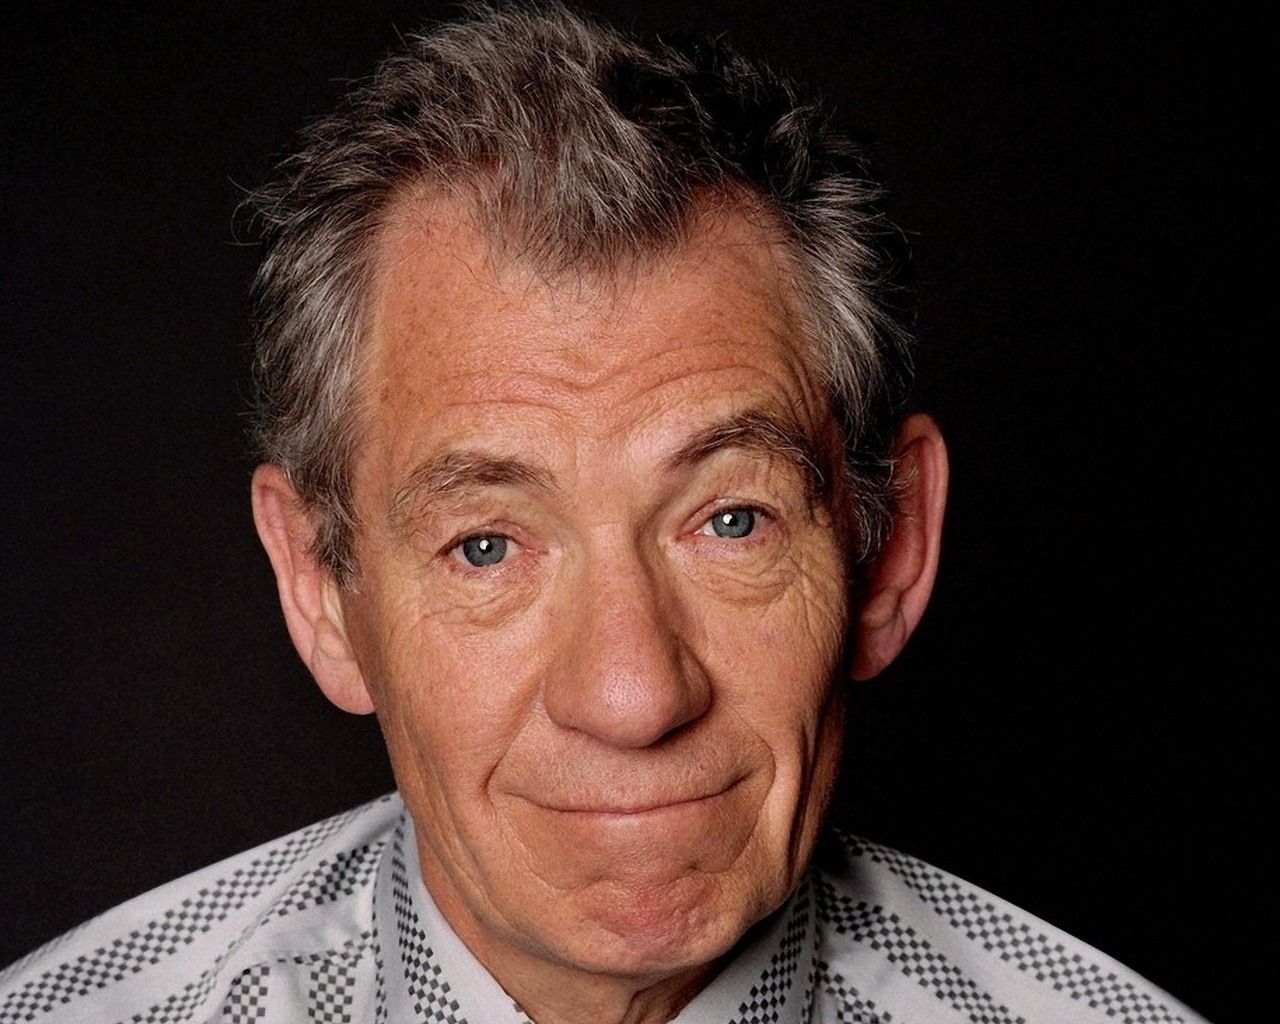 Ian McKellen to act in A Slight Trick of the Mind as Sherlock Holmes